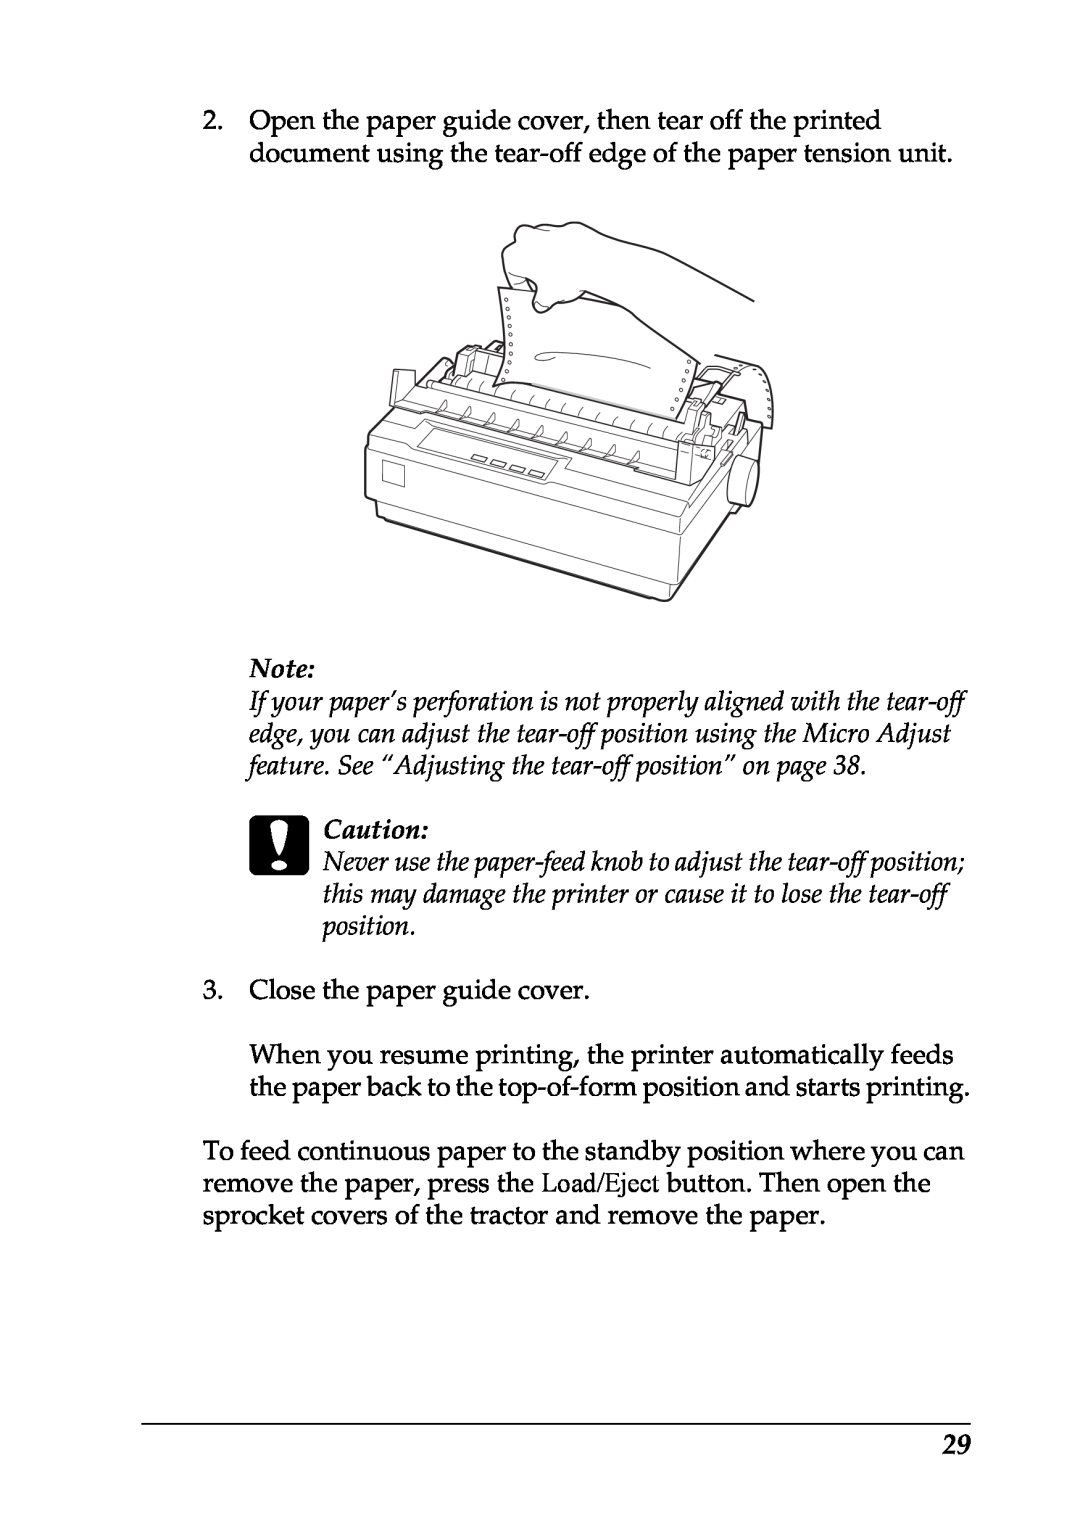 Epson LX-1170 manual c Caution, Close the paper guide cover 